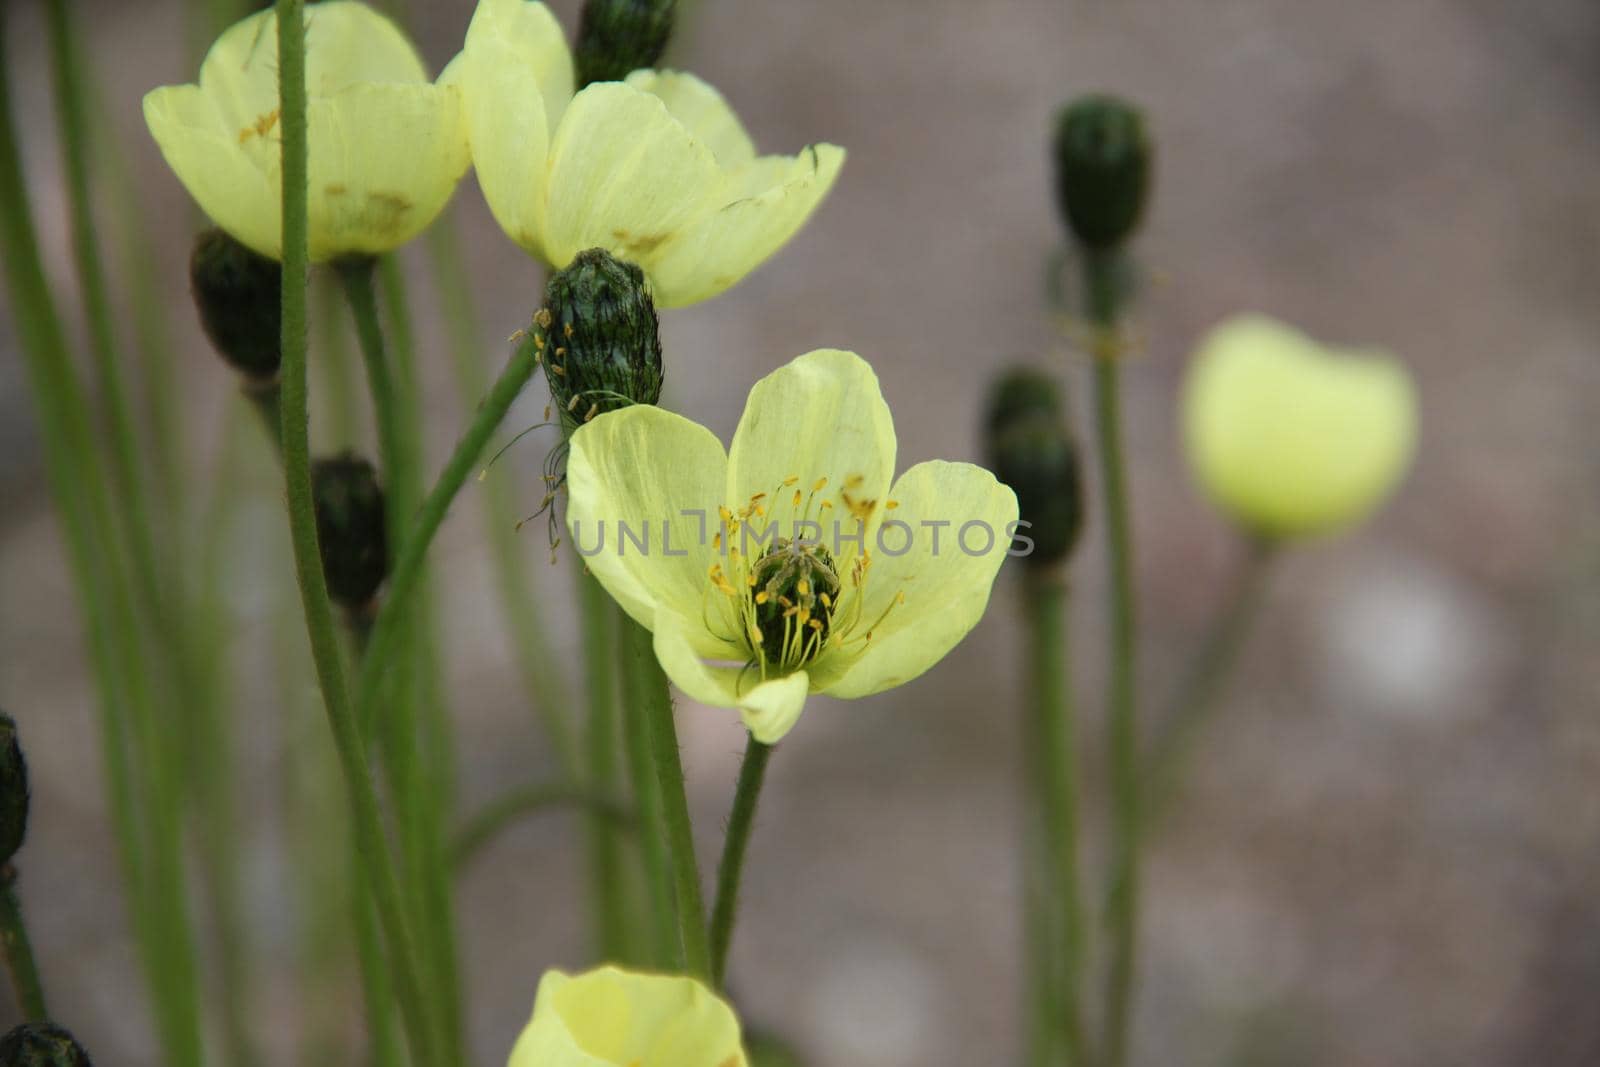 Papaver radicatum is a species of poppy known by the common names Arctic poppy, rooted poppy, and yellow poppy. It is a flowering plant in the family Papaveraceae